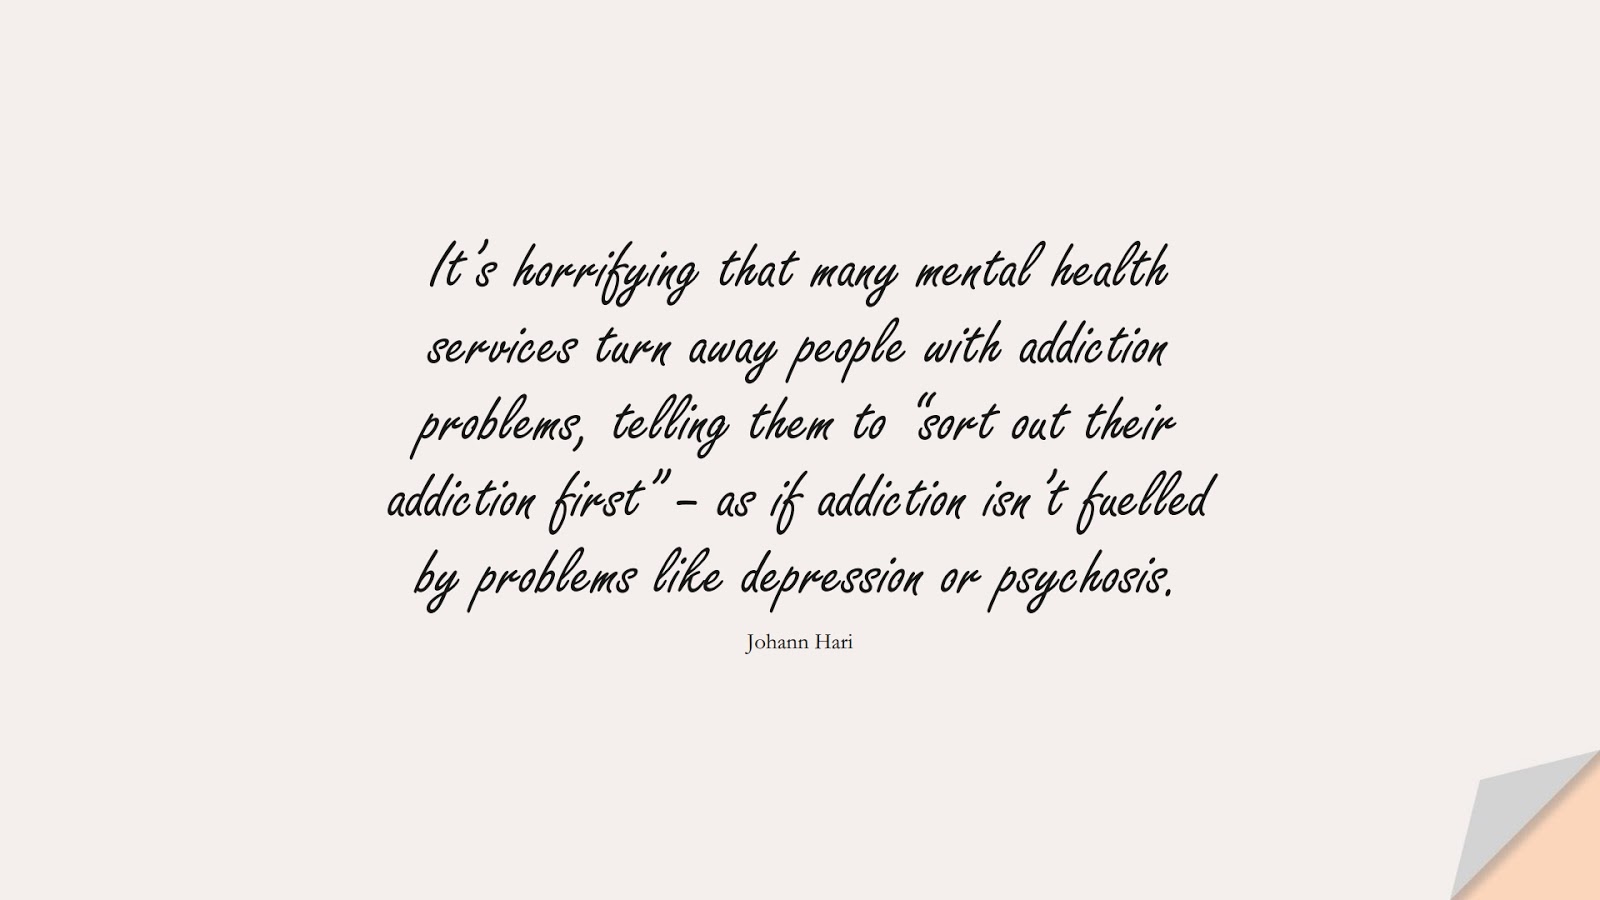 It’s horrifying that many mental health services turn away people with addiction problems, telling them to “sort out their addiction first” – as if addiction isn’t fuelled by problems like depression or psychosis. (Johann Hari);  #DepressionQuotes